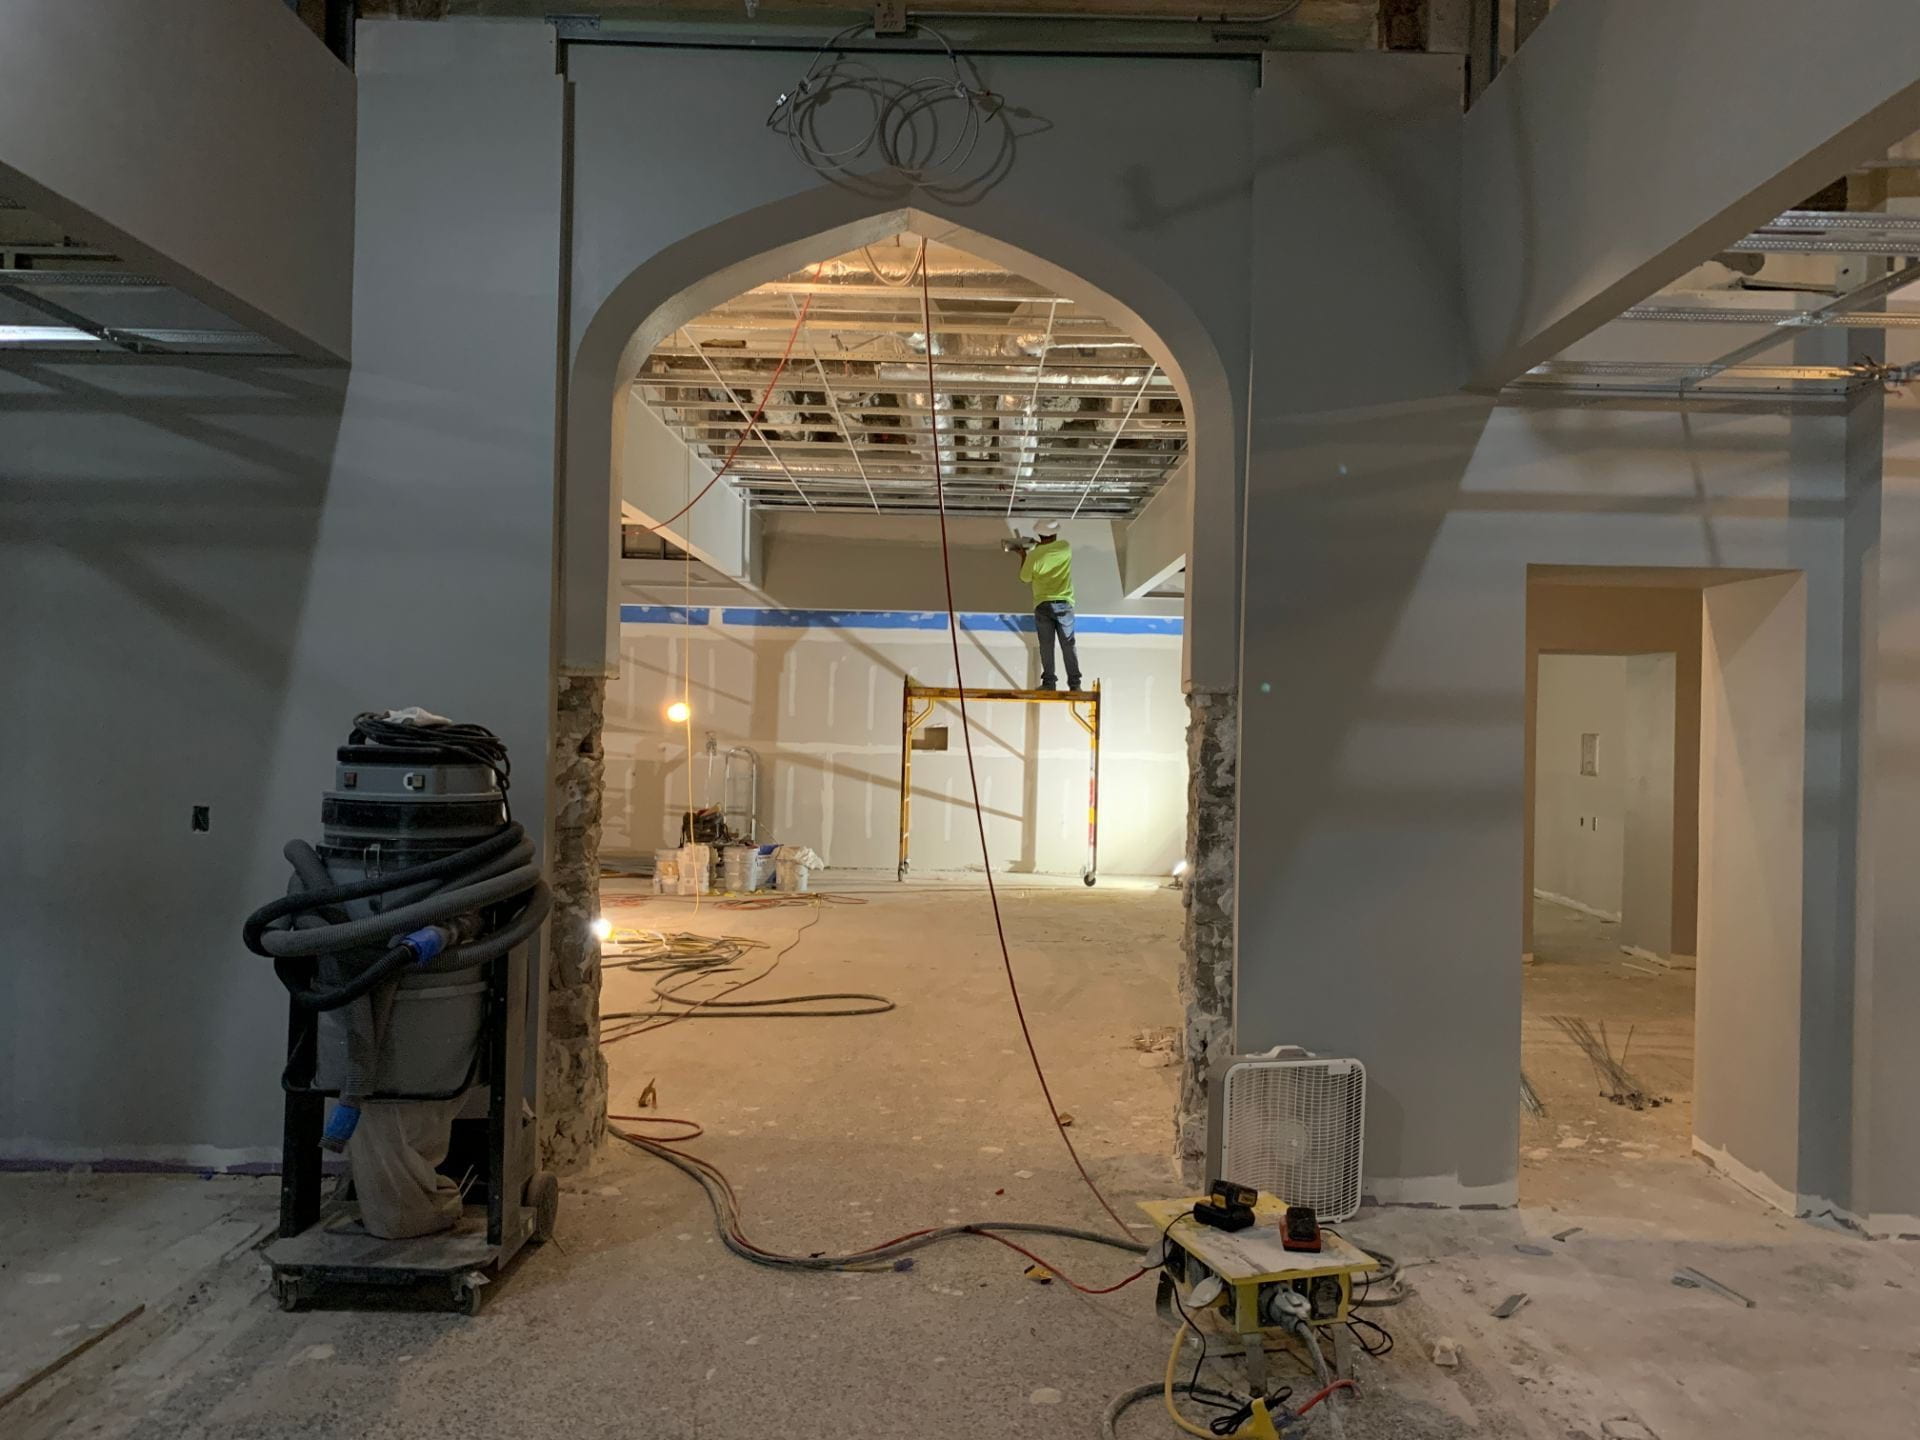 A construction worker is seen on the other side of an arched doorway.